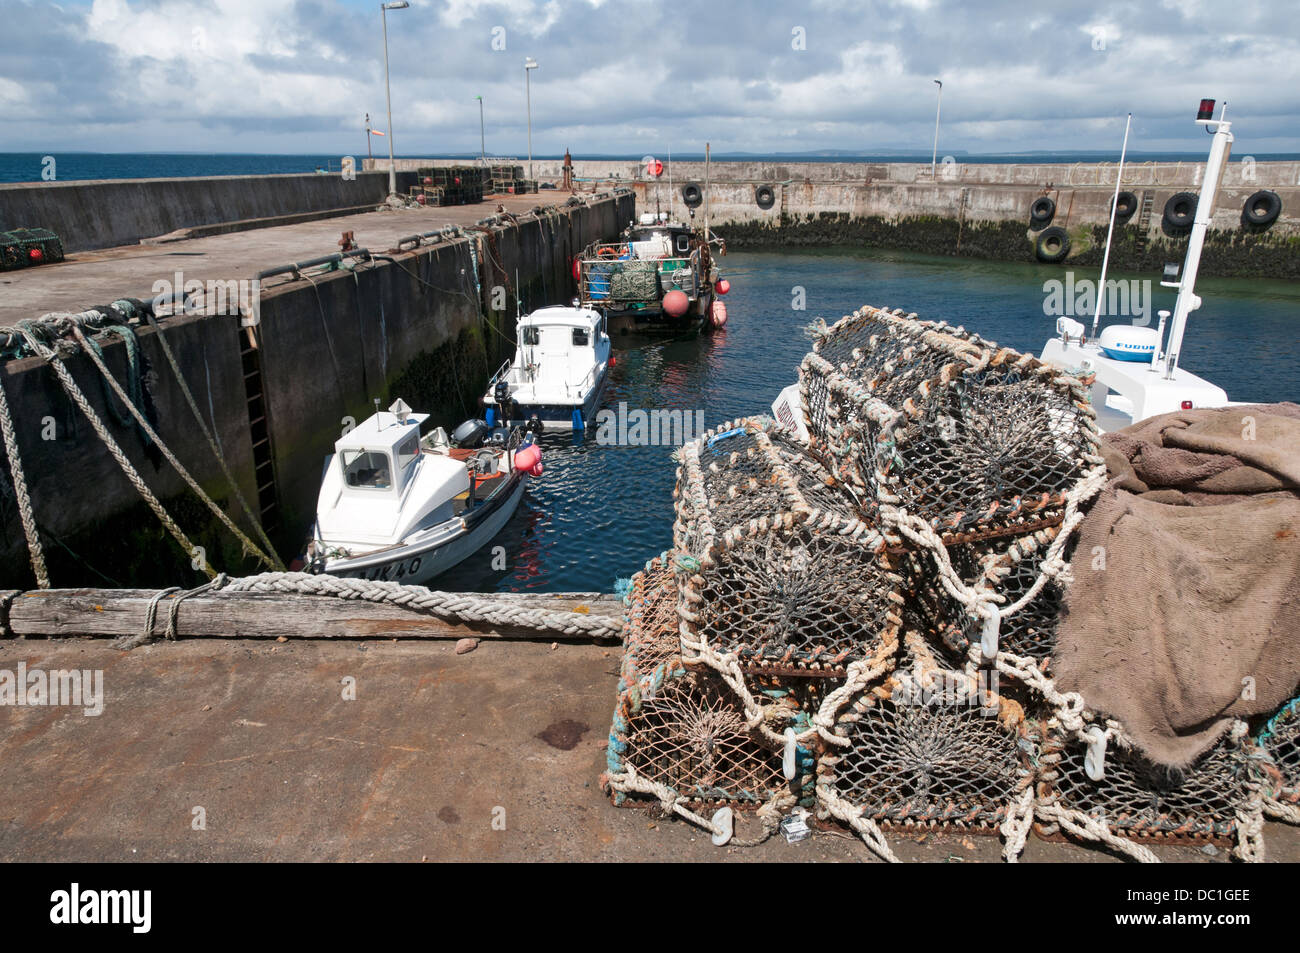 Lobster creels stacked by the harbour at John o'Groats, Caithness, Scotland, UK Stock Photo